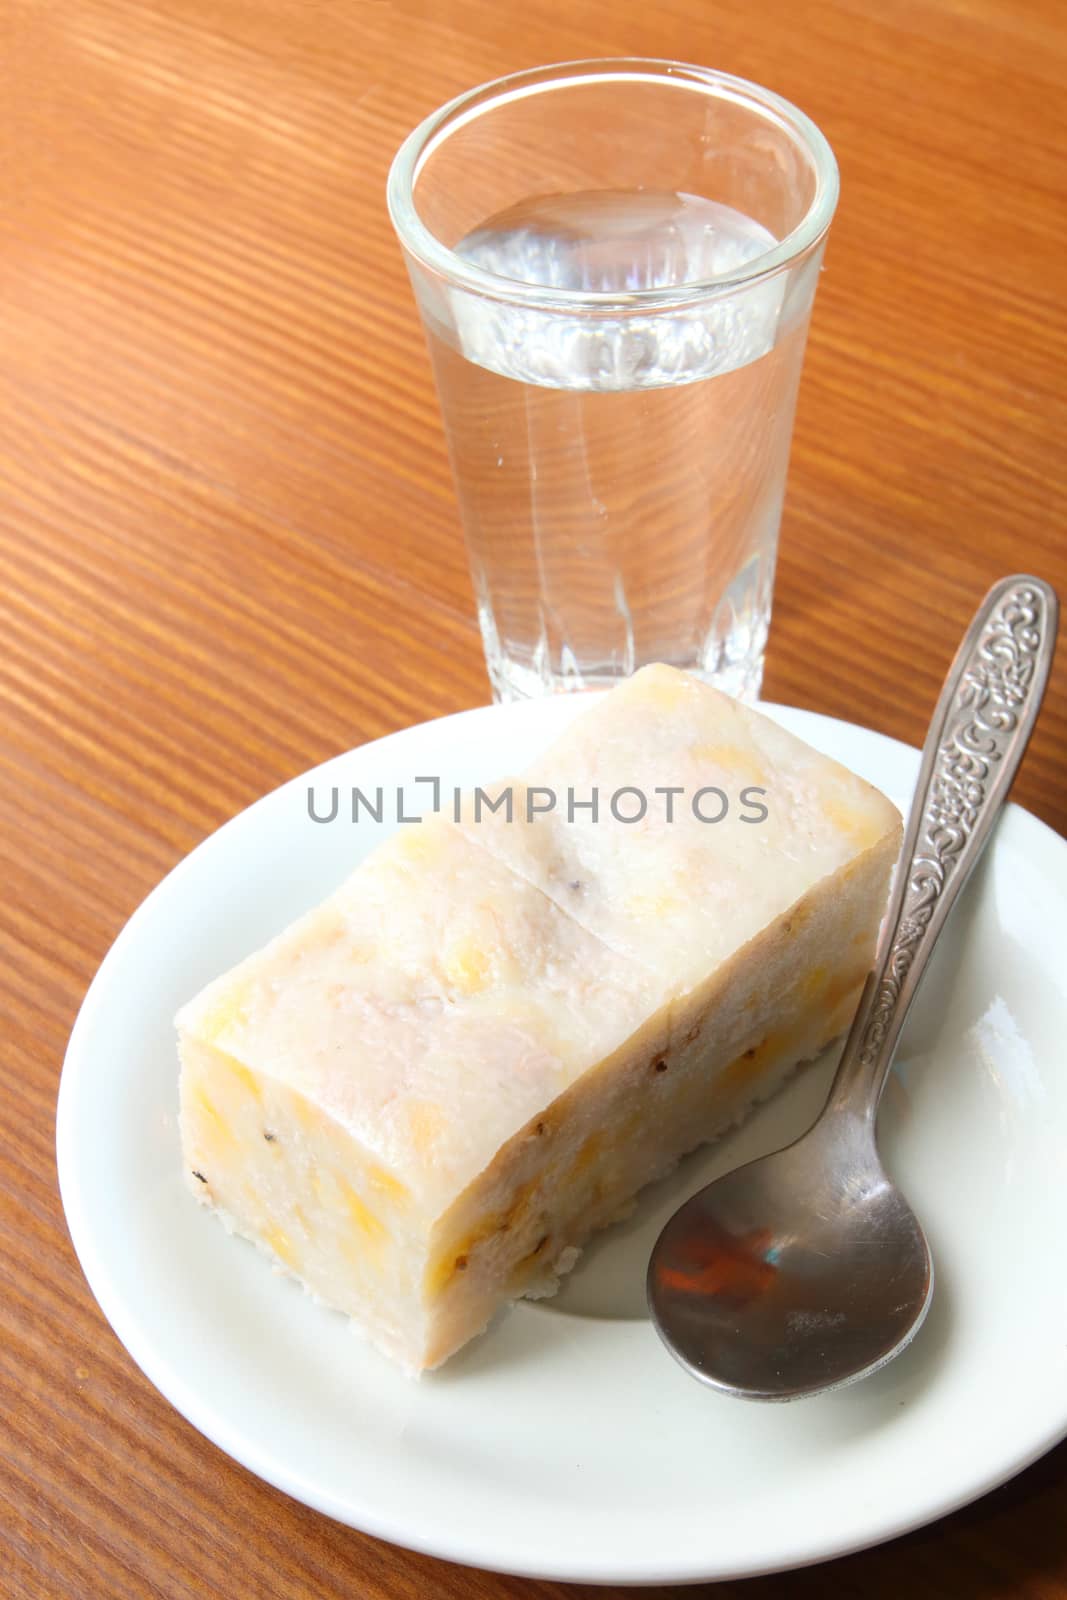 Thai dessert made from banana and coconut serve with a glass of water.